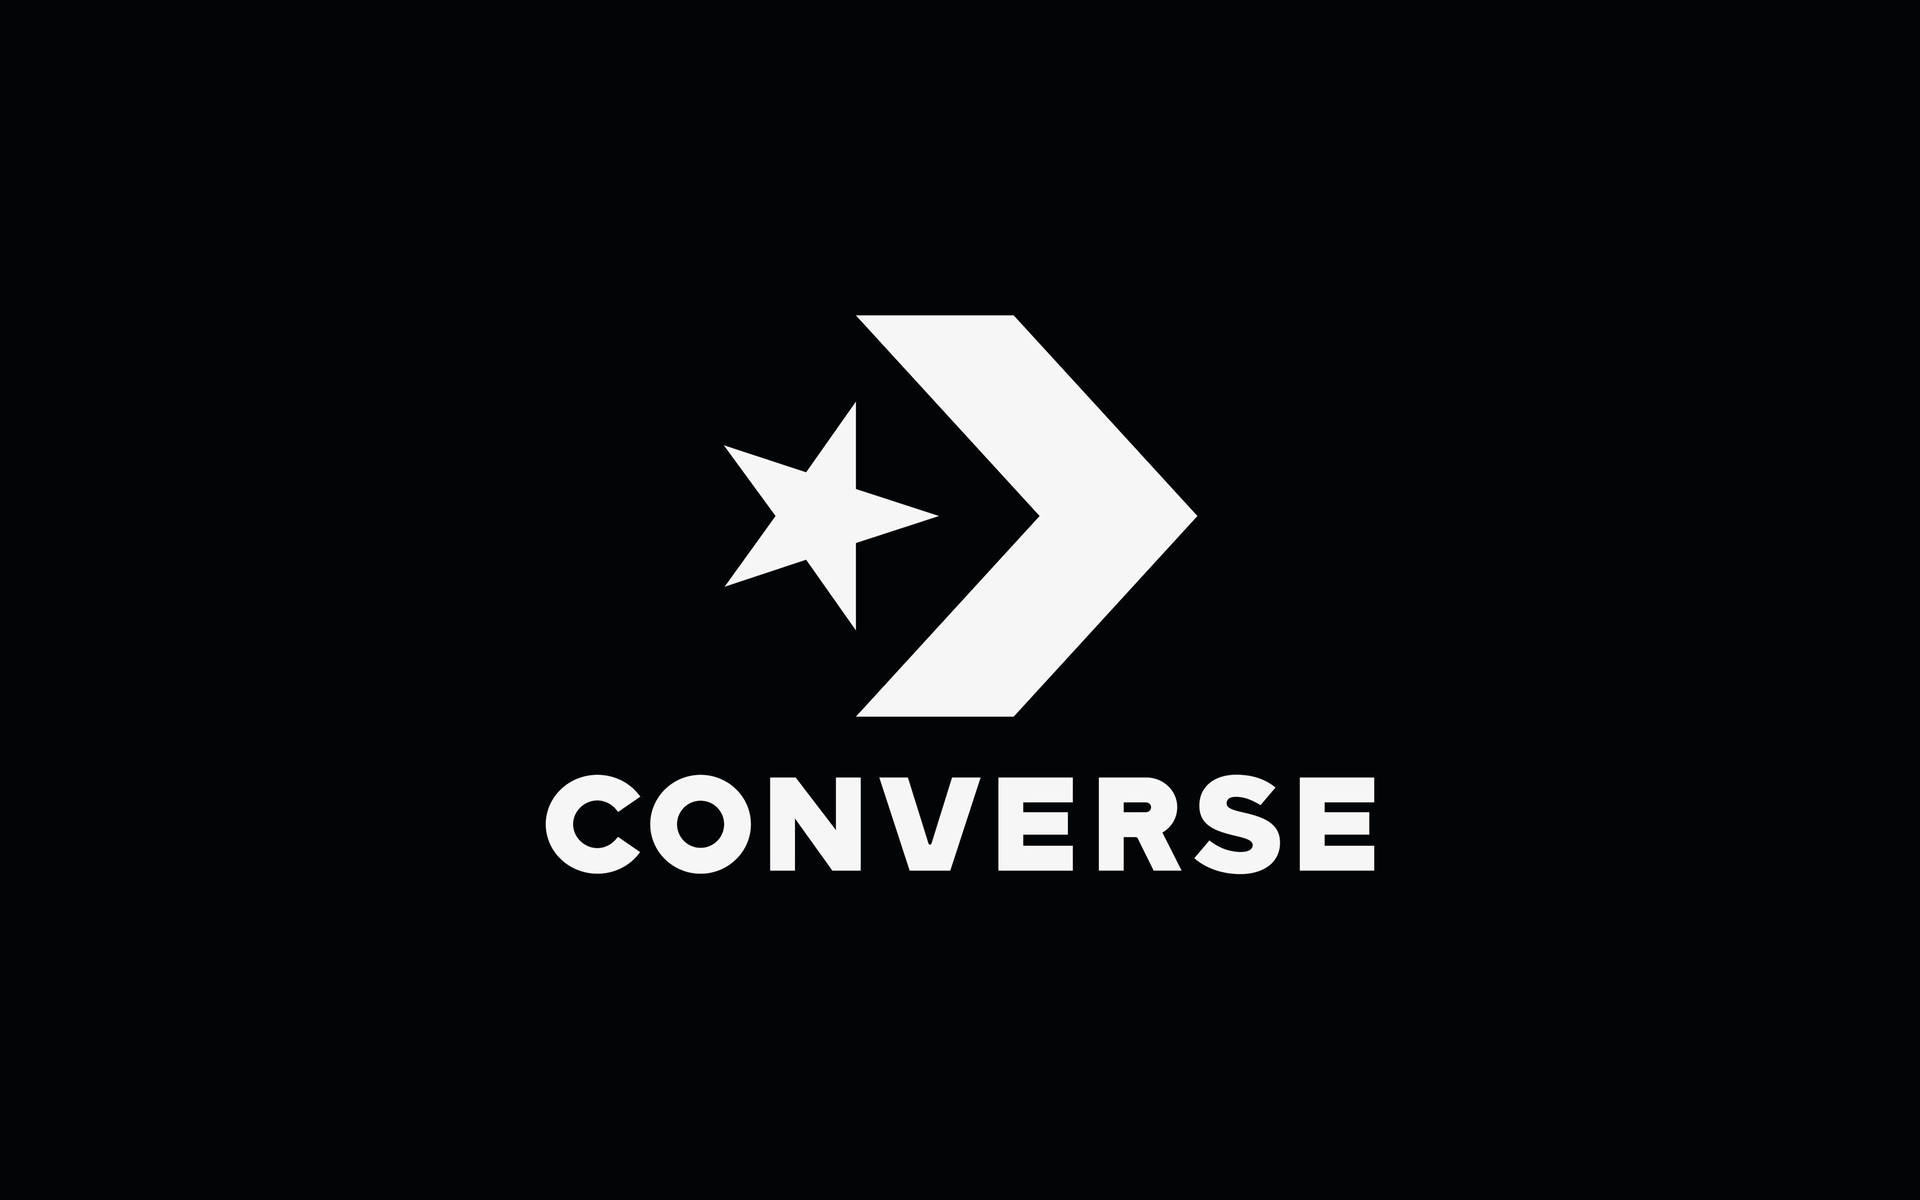 Iconic Converse logo on white background Wallpaper